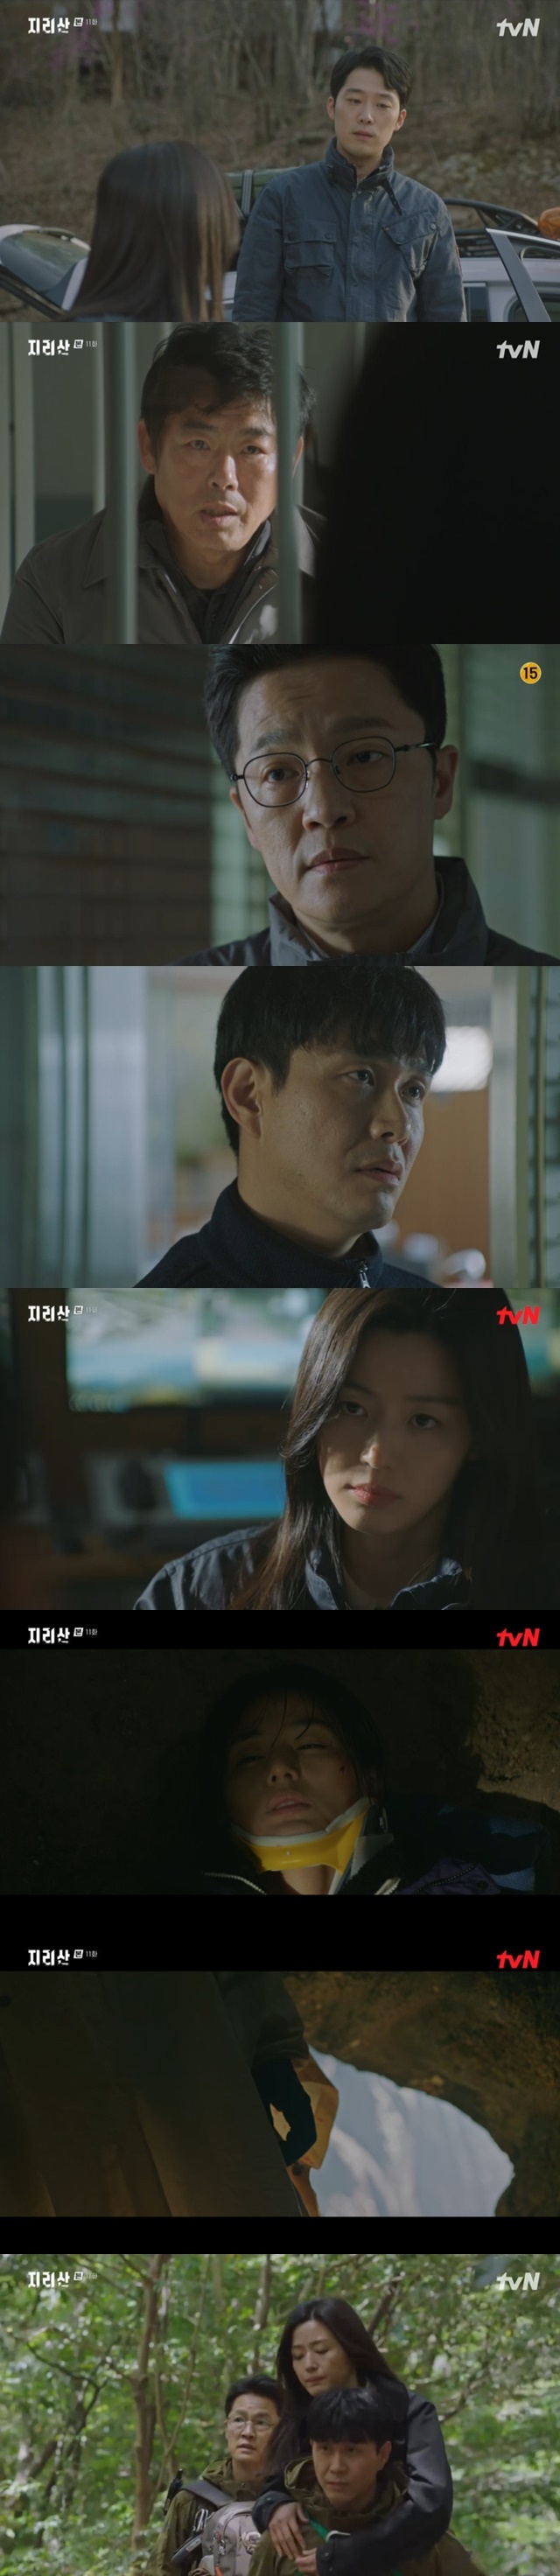 Jun Ji-hyun suspected Oh Jung-se as the culprit following Sung Dong-ilOn the 11th episode of TVNs Saturday Drama Jirisan (played by Kim Eun-hee/directed by Lee Eung-bok Park So-hyun), which aired on November 27, Seo-gang (played by Jun Ji-hyun) suspected Jeong Gu-young (Oh Jung-se) as the culprit.Earlier, Seoigang suspected Cho Dae-jin (Sung Dong-il) as the culprit who committed Murder by pretending to be an accident in Jirisan.Because I found a bloody yellow ribbon that induces distress in the drawer of Cho Dae-jin.After Lee Da-won (Gormin City) last met Cho Dae-jin in Jirisan and died with his gloves on him, leaving a recording file, the suspicion of the Seoi River grew bigger.The police also suspected Cho Dae-jin as the culprit, but Cho Dae-jin denied all charges. Kim Sol (Lee Ga-seop) told Seo-gang, Isnt it easy for anyone to get gloves?Seoi River went to Cho Dae-jin and asked why there was a yellow ribbon in the drawer. Cho Dae-jin mentioned the yellow ribbon and the poisoned yogurt.I told him everything.Cho Dae-jin was chasing the criminal separately with Park Il-hae (Jo Han-cheol).The reason why Cho Dae-jin went to the place on the day of Lee Da-wons death was also because a resident was informed that the poisoned yogurt was there.So, the Seo River informed the situation to the Jingu-young along with Park Il-hae.In addition, Seoigang confessed that the reason why he was on the mountain with Jang hyunjo in 2019 was to catch Murder criminal who pretended to be an accident.At that time, the Seoi River was lured by a stick on the eaves of the eyes, and the snow was broken and seriously injured. gang hyun was injured after first aid to the injured Seoi River and went to request rescue.The killer hurt gang hyun and then came back to the Seoi River, but the Seoi River saw his gloves and did not see his face. The criminal ran away after hearing the people calling the name of the Seoi River.The Seoi River told Jeong Gu-young that there would be evidence left by gang hyun on the black leg, saying, You can see it by going there yourself. Take me there.It is impossible alone, he said, and Jeong Gu-young and Park Il-hae took the Seoi River to the black bridge.It was revealed that the Seoi River met Park Il-hae separately four hours before meeting Jeong Gu-young and sold Arlington Road to catch Jeong Gu-young.Seoi River was convinced that the killer was one of the Rangers, and Jeong Gu-young suspected that Lee Da-won was in the missing mountain.The Seoi River told Park Il-hae, If there is any decisive evidence, he will try to kill me. Then we will have clear evidence.Then, Seoi River said, If I really die, I will meet Hyunjo.Although he was chasing the criminal separately, he could not slow down the suspicions about Cho Dae-jin and Park Il-hae, and Jingu-young was highlighted as a new suspect.In addition, Kimsol, who was revealed as the owner of the suspicious gloves through the last broadcast, was interested in the identity of the real criminal by digging Arlington Road to catch Real with the life of the Seo River in a suspicious situation.